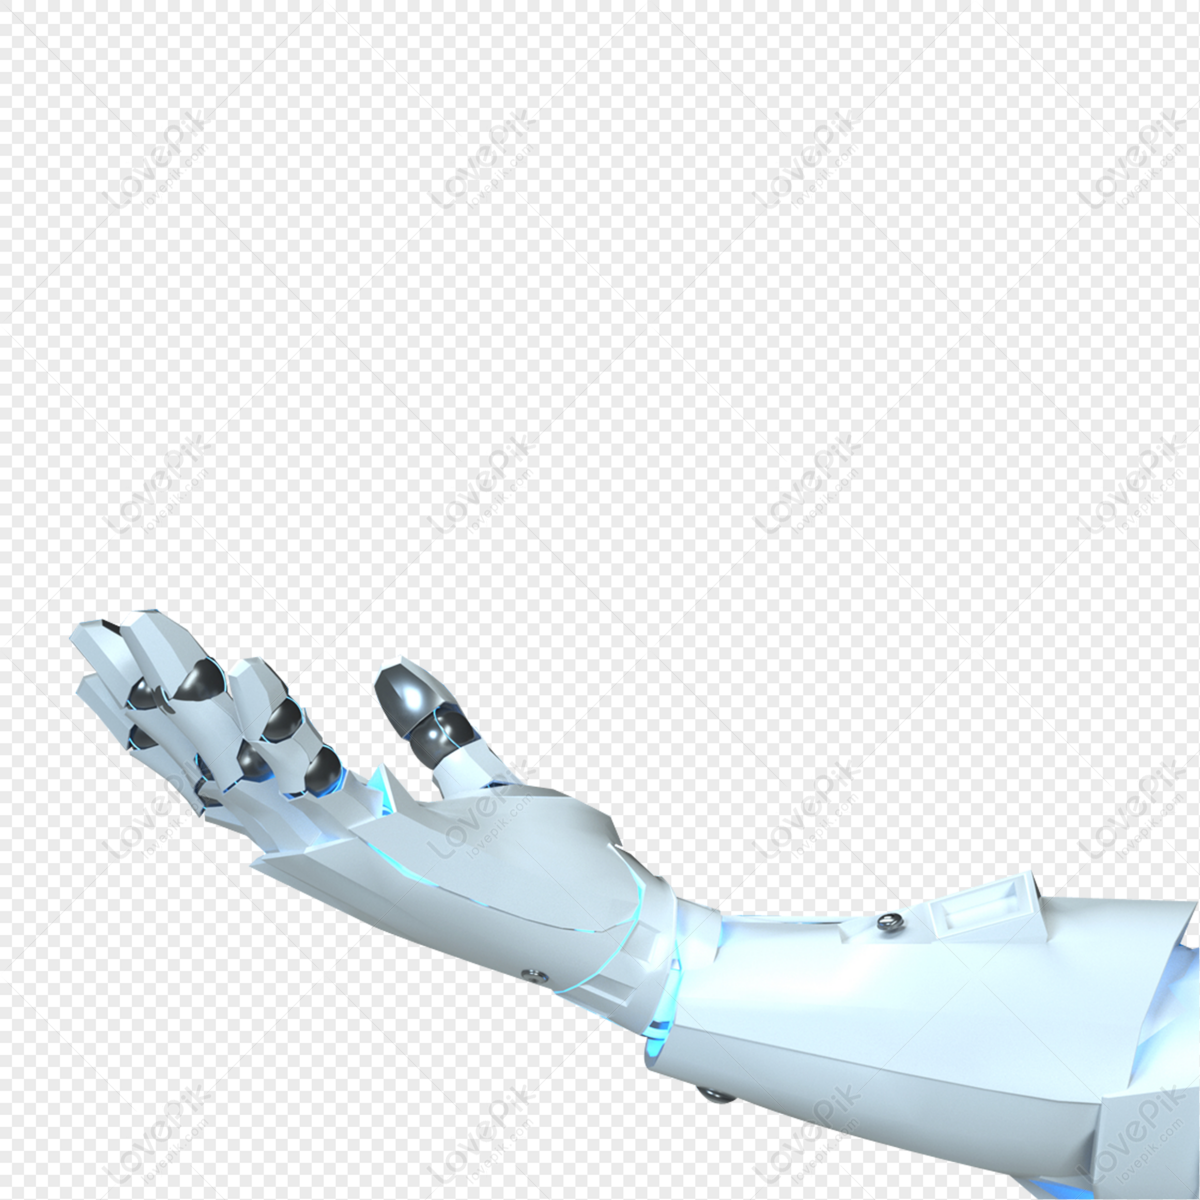 Robotic Hand PNG Images With Transparent Background | Free ...